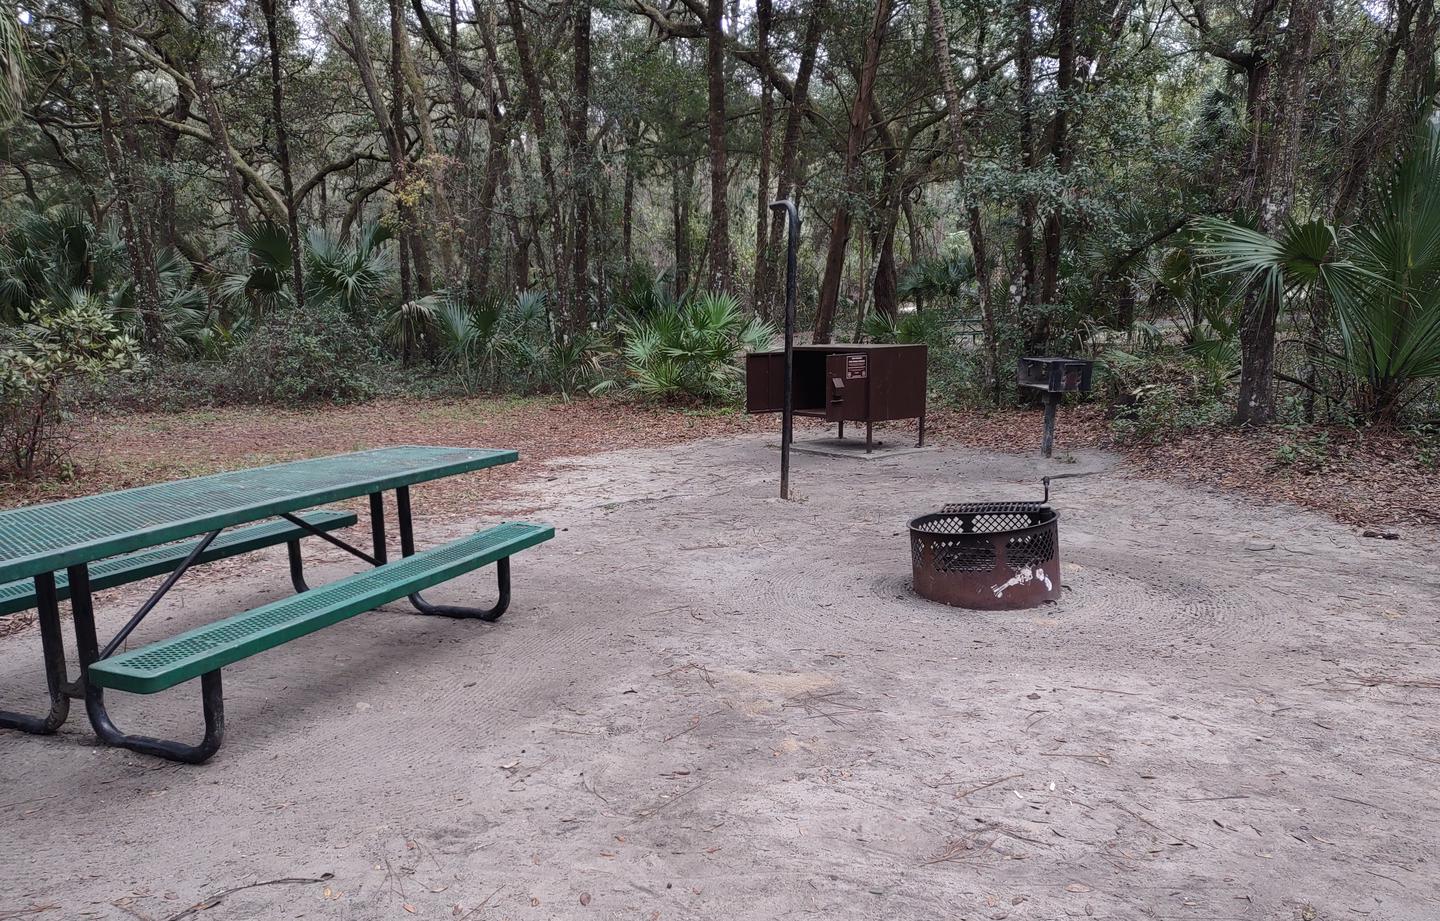 Another view of site 42Amenities: fire ring, picnic table, grill, light pole, bear-proof storage locker